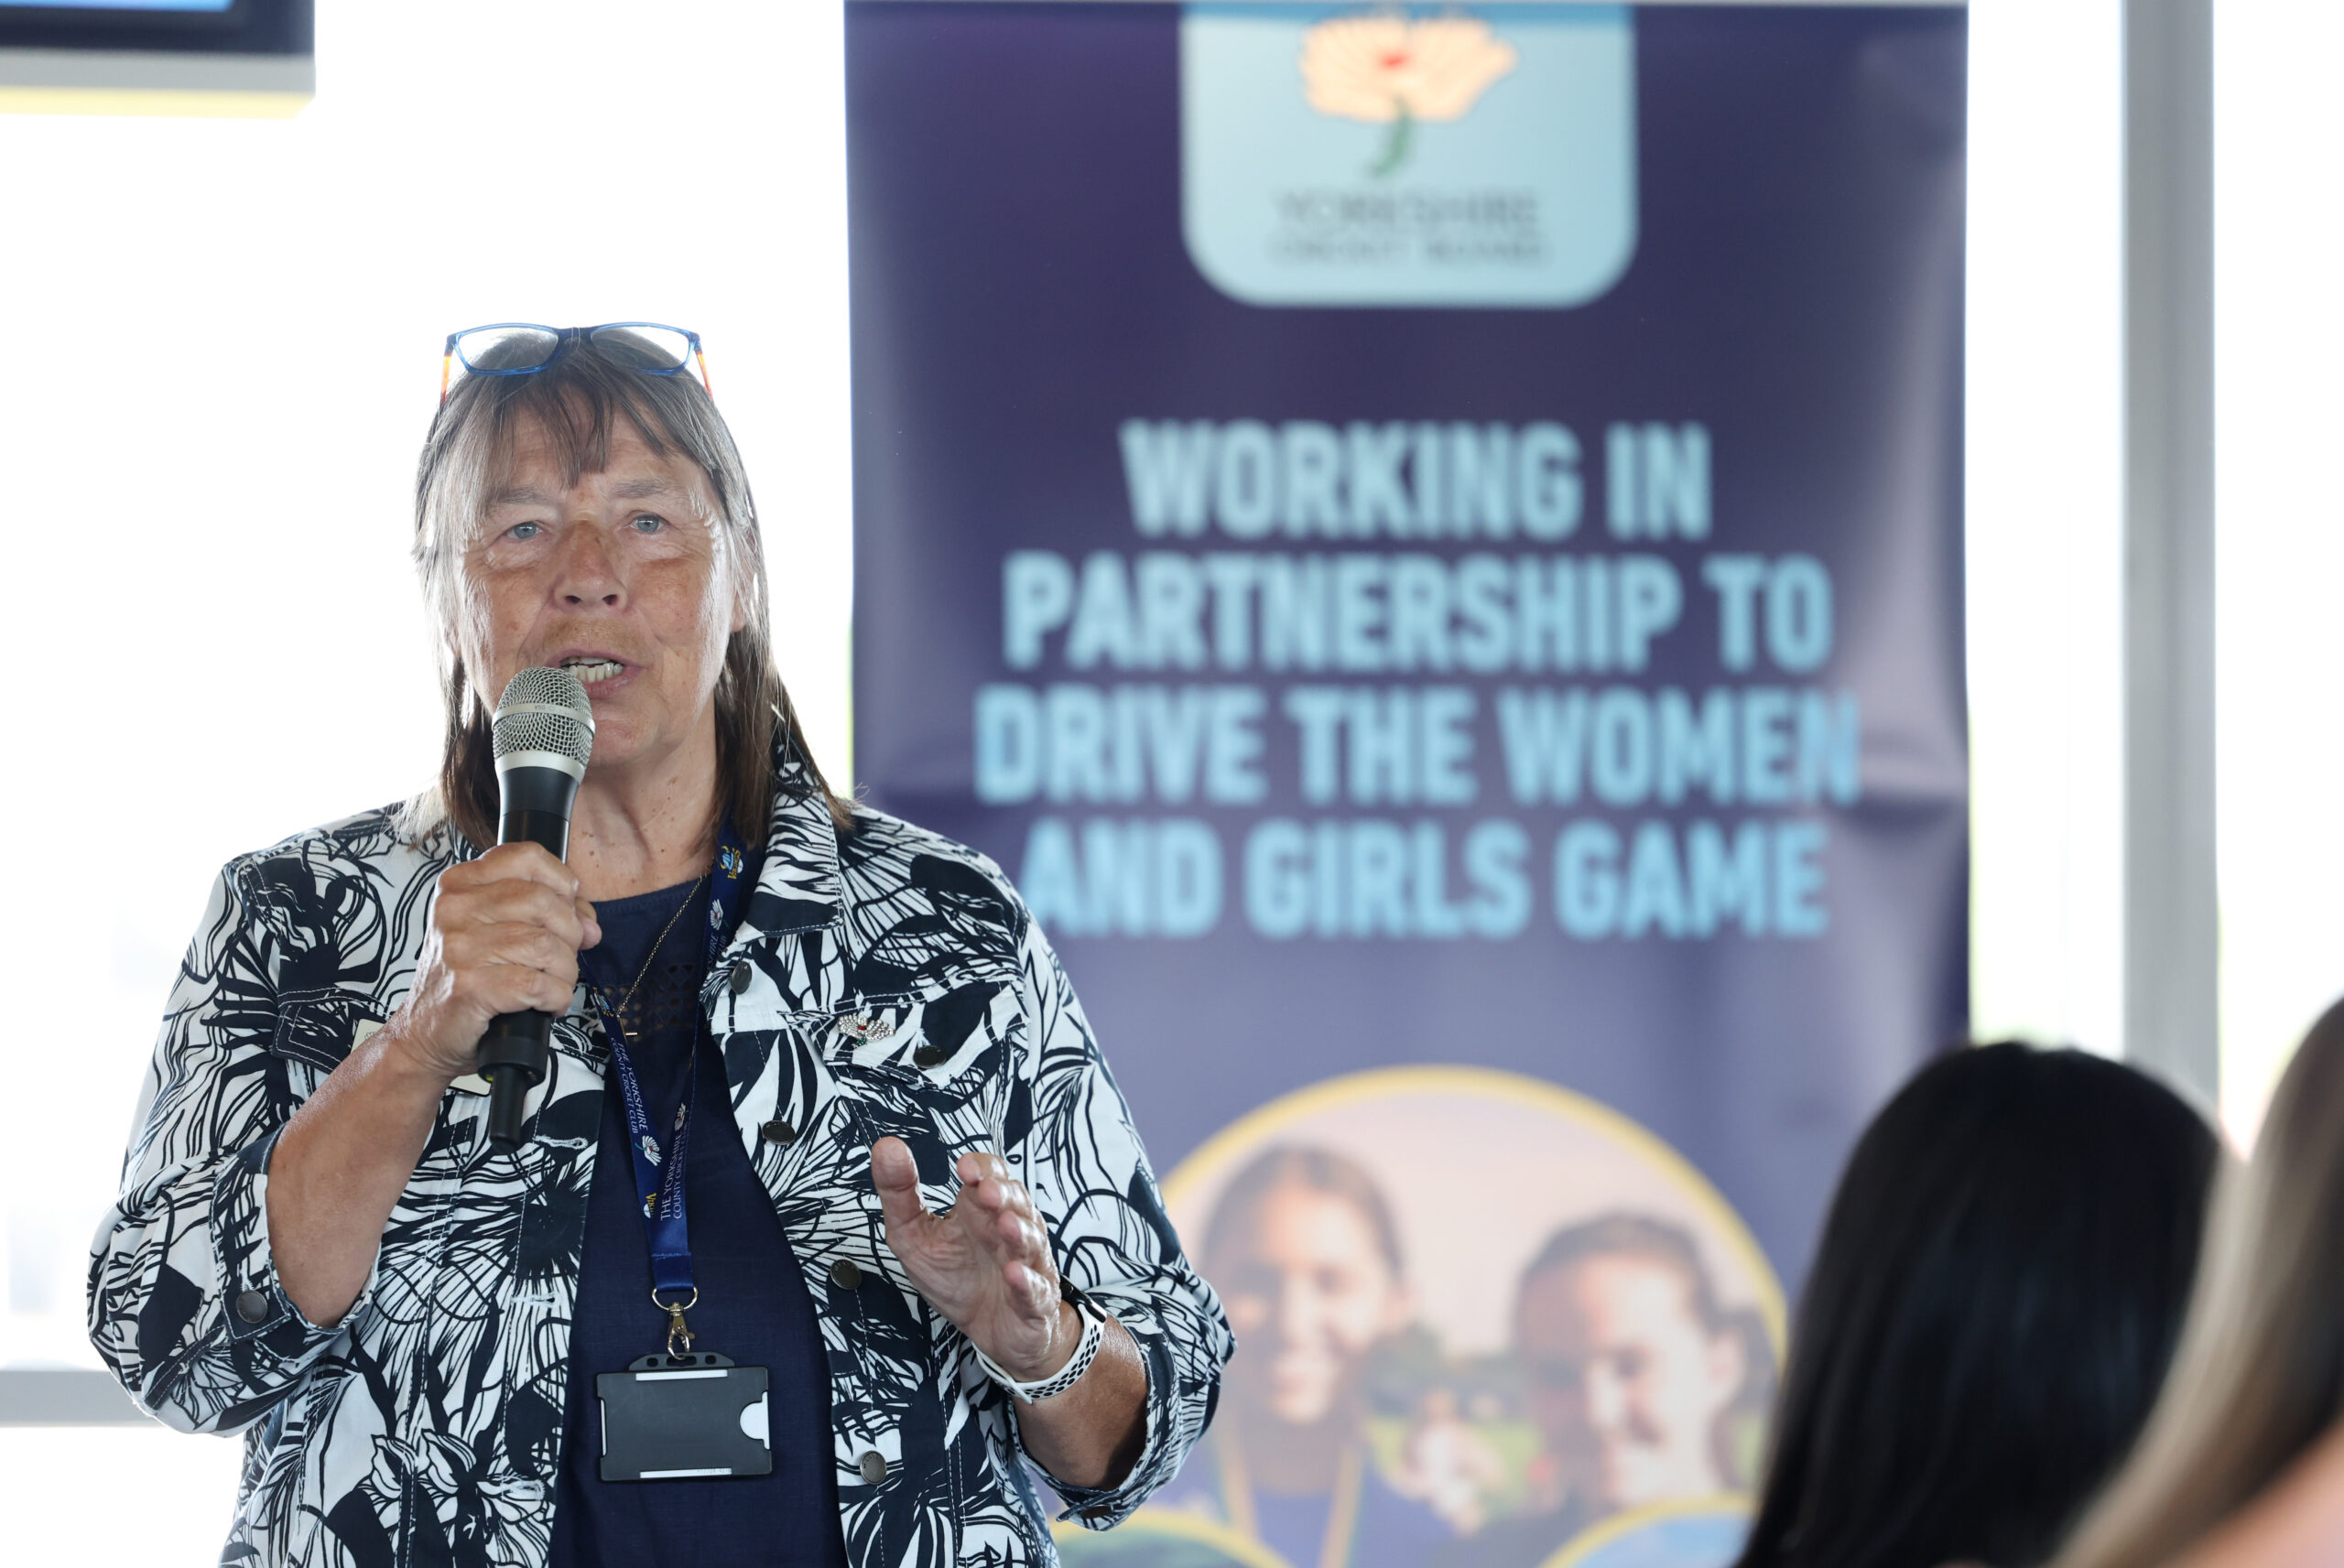 Yorkshire hosts its first Women and Girls’ Cricket Conference – Yorkshire County Cricket Club